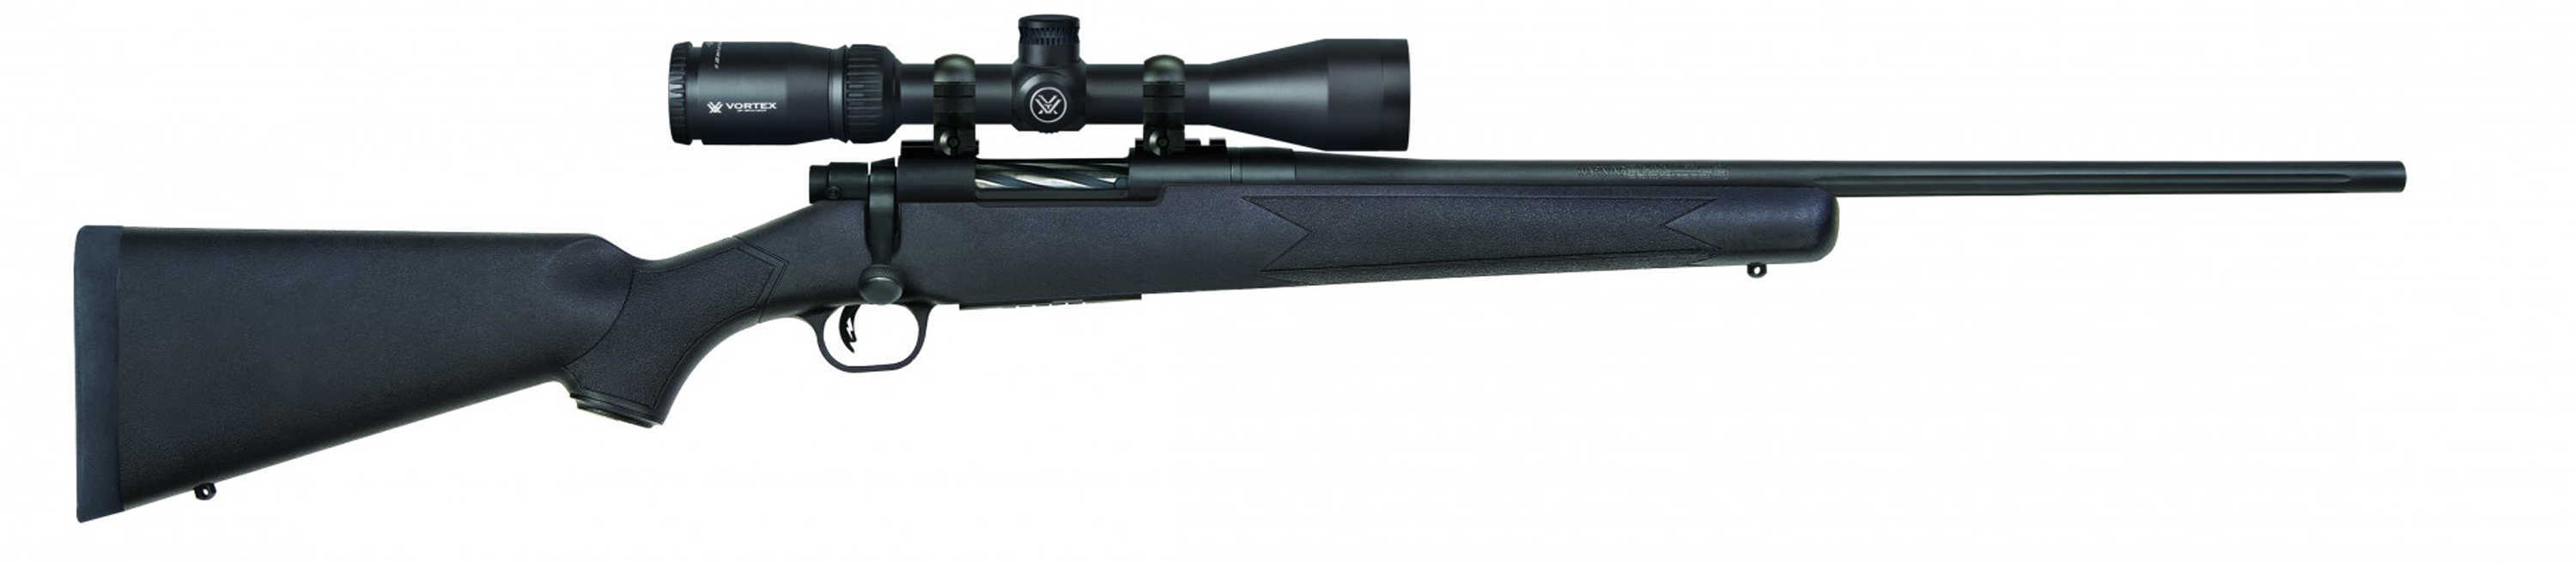 Mossberg Patriot 270 Winchester 22" Fluted Barrel 3x9x40mm Vortex Scope Combo Package Bolt Action Rifle 27934